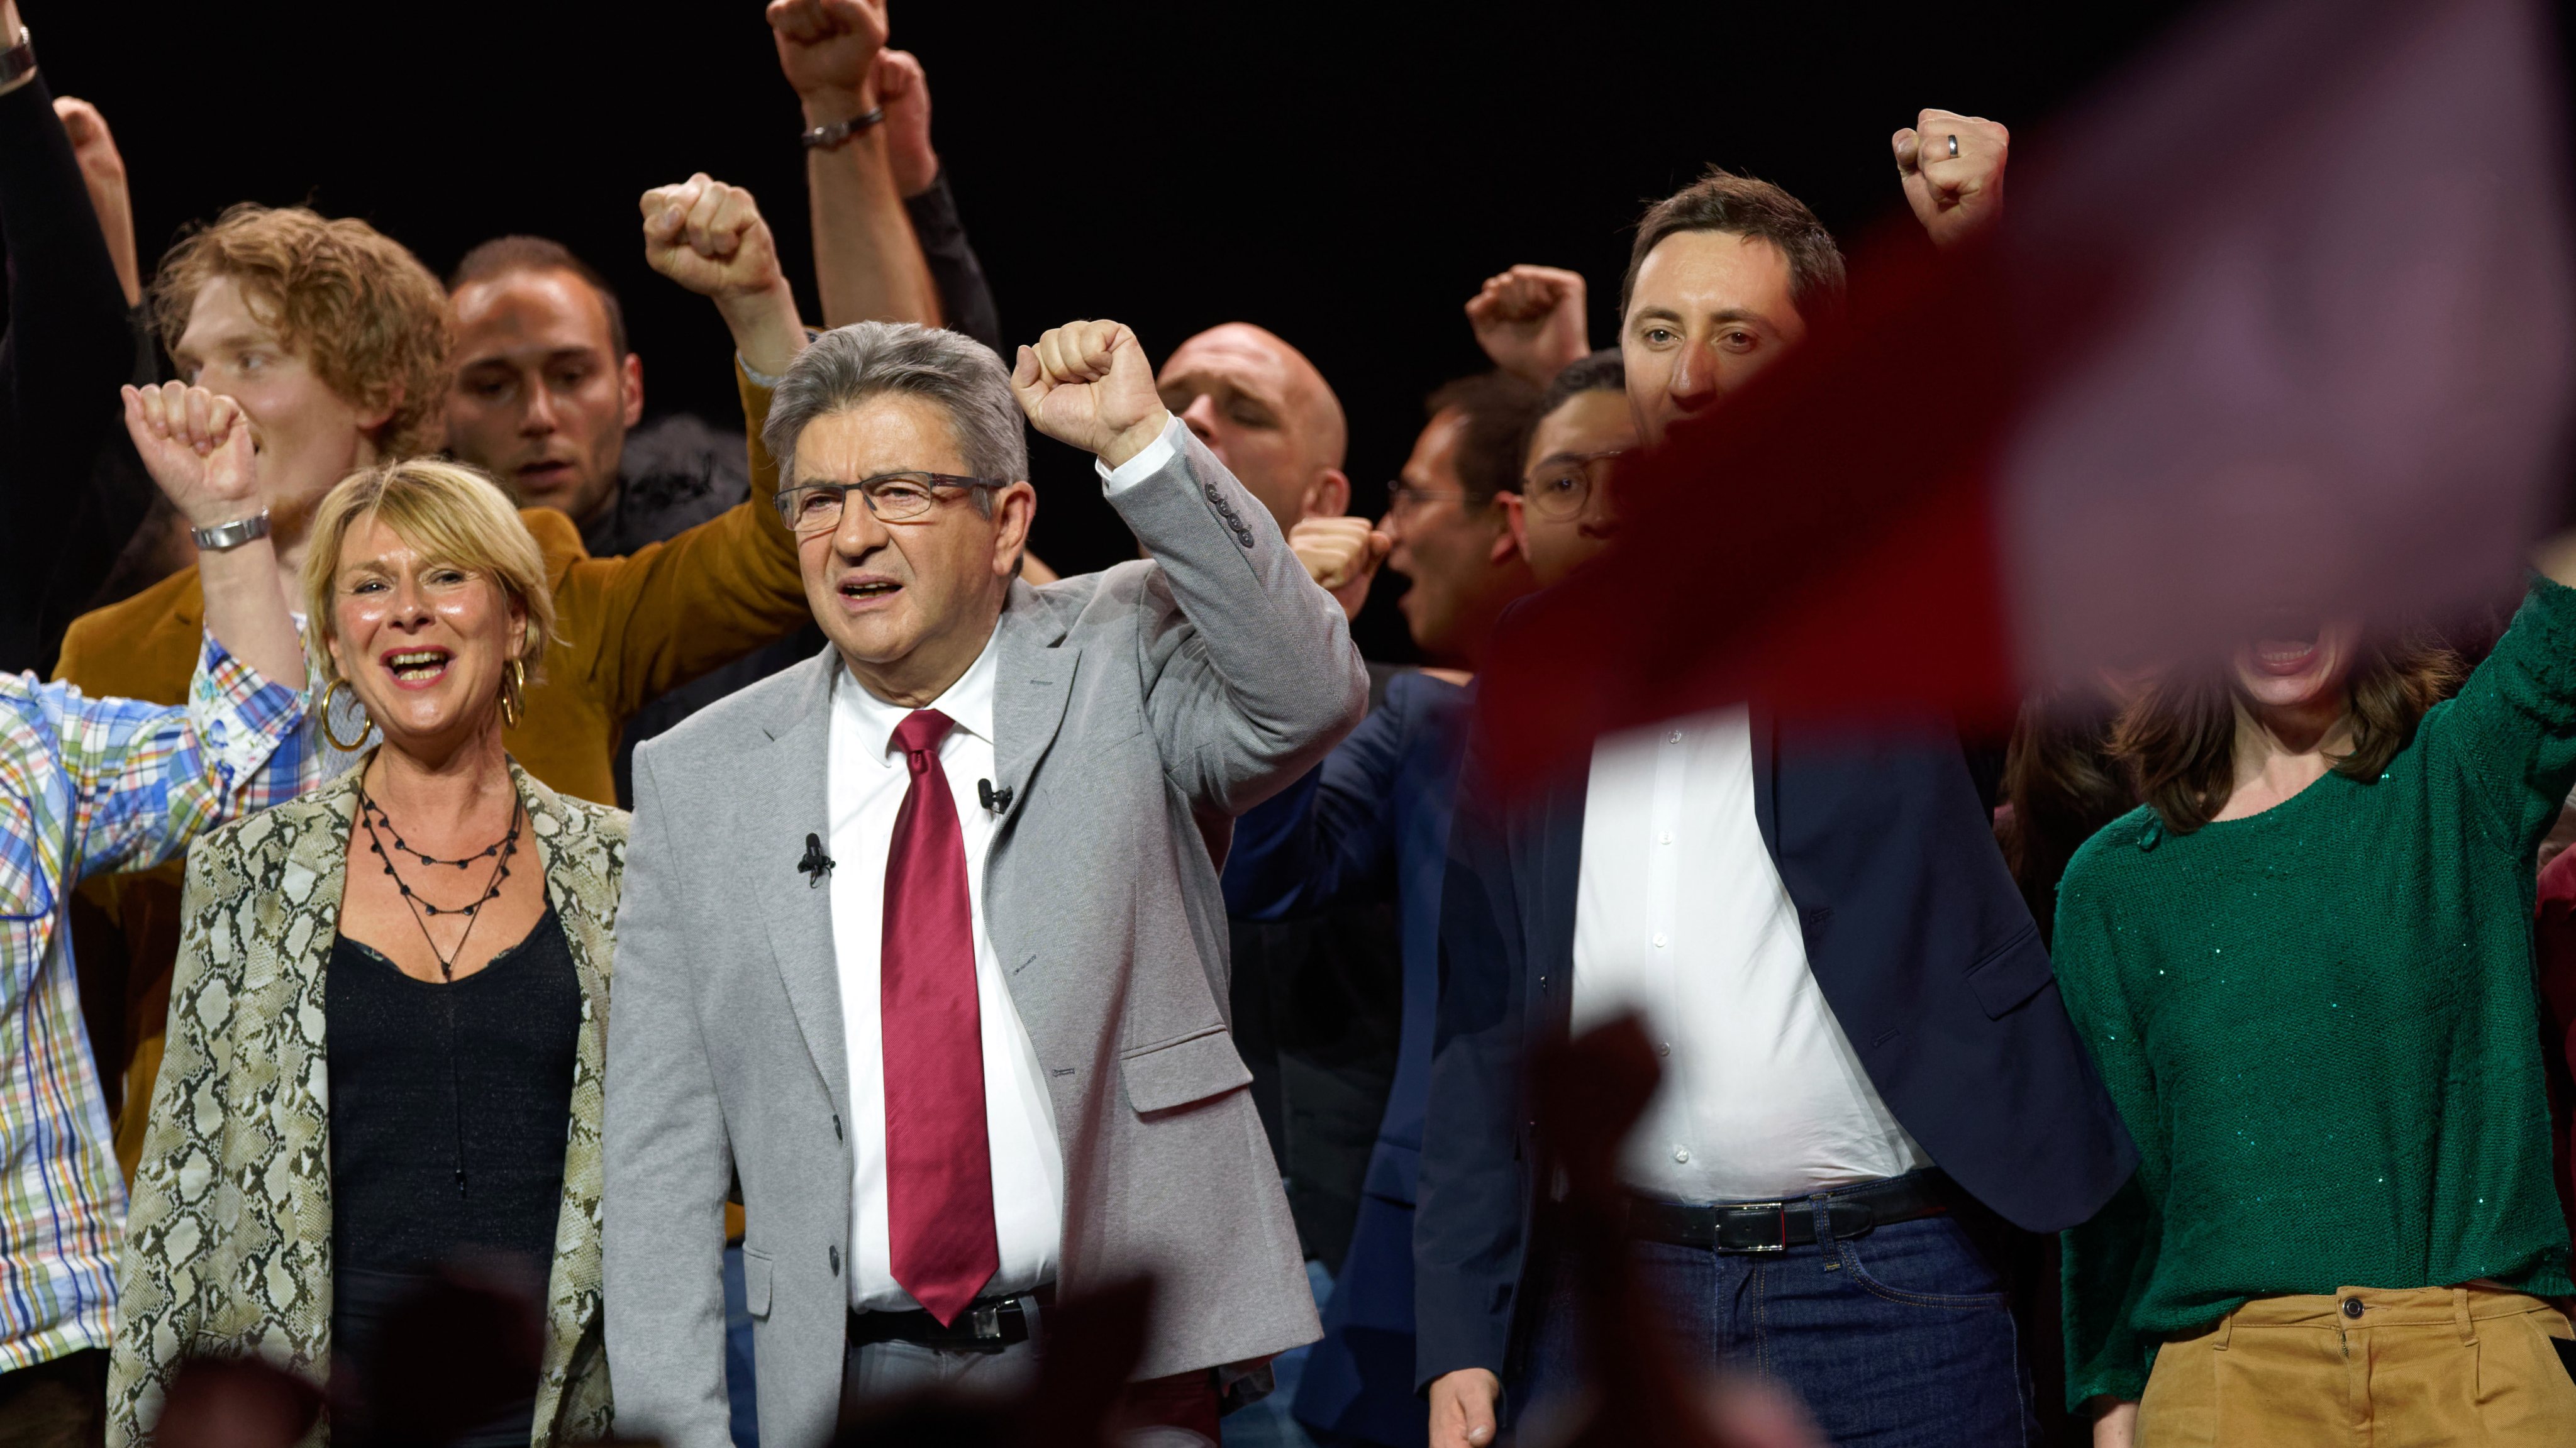 French Left-Wing Presidential Candidate Jean-Luc Melenchon At The Final Rally On The Campaign Trail